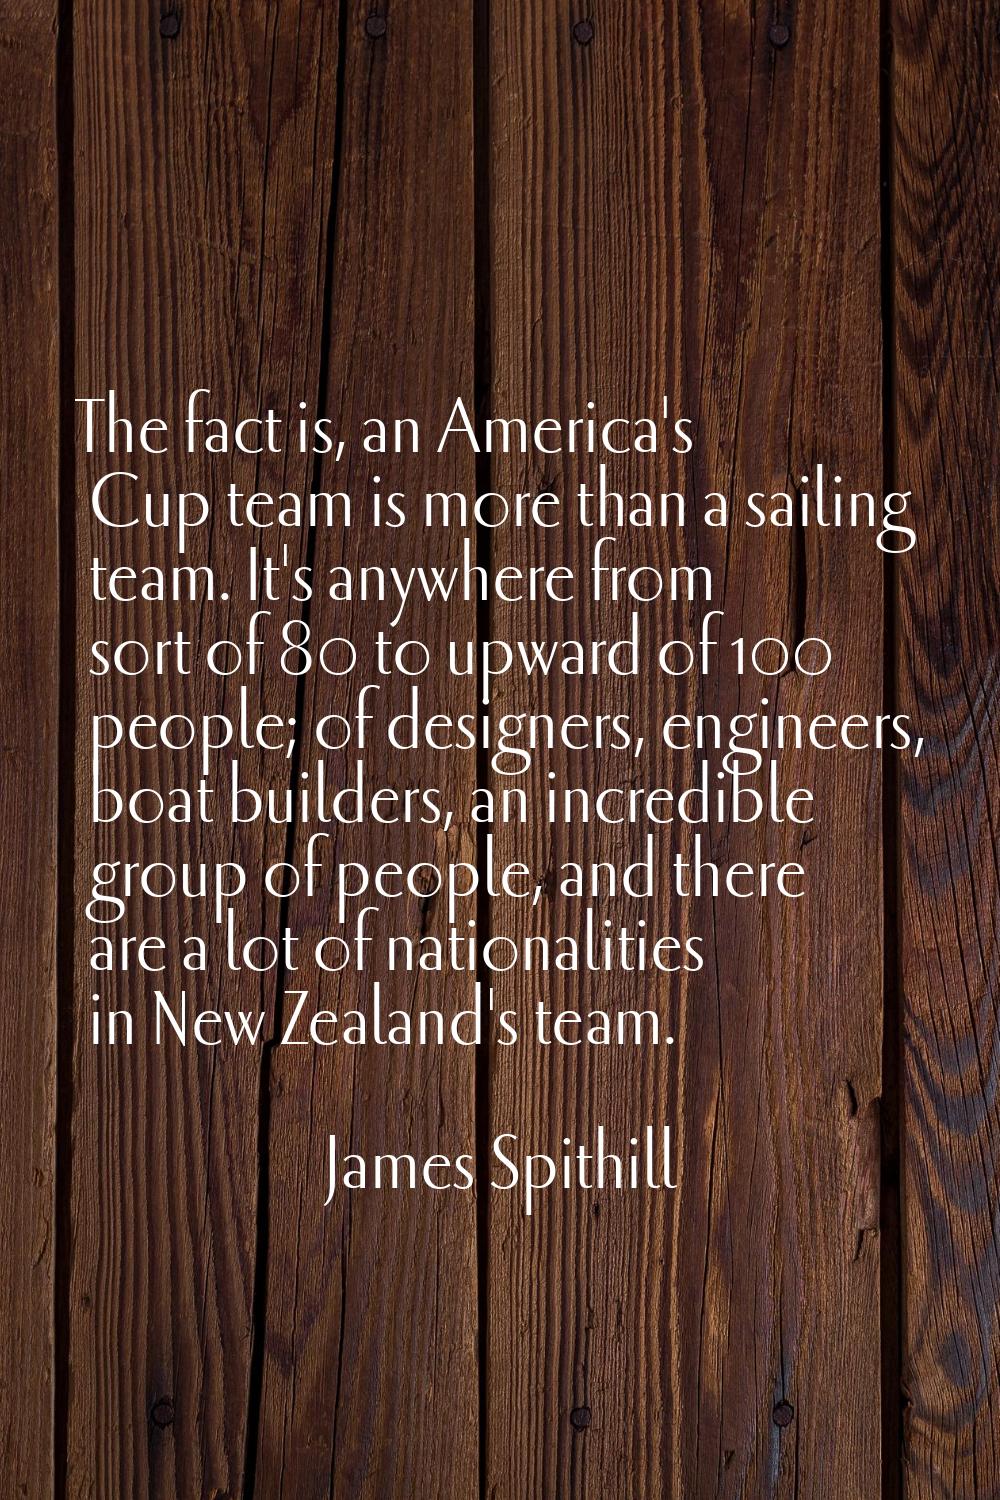 The fact is, an America's Cup team is more than a sailing team. It's anywhere from sort of 80 to up